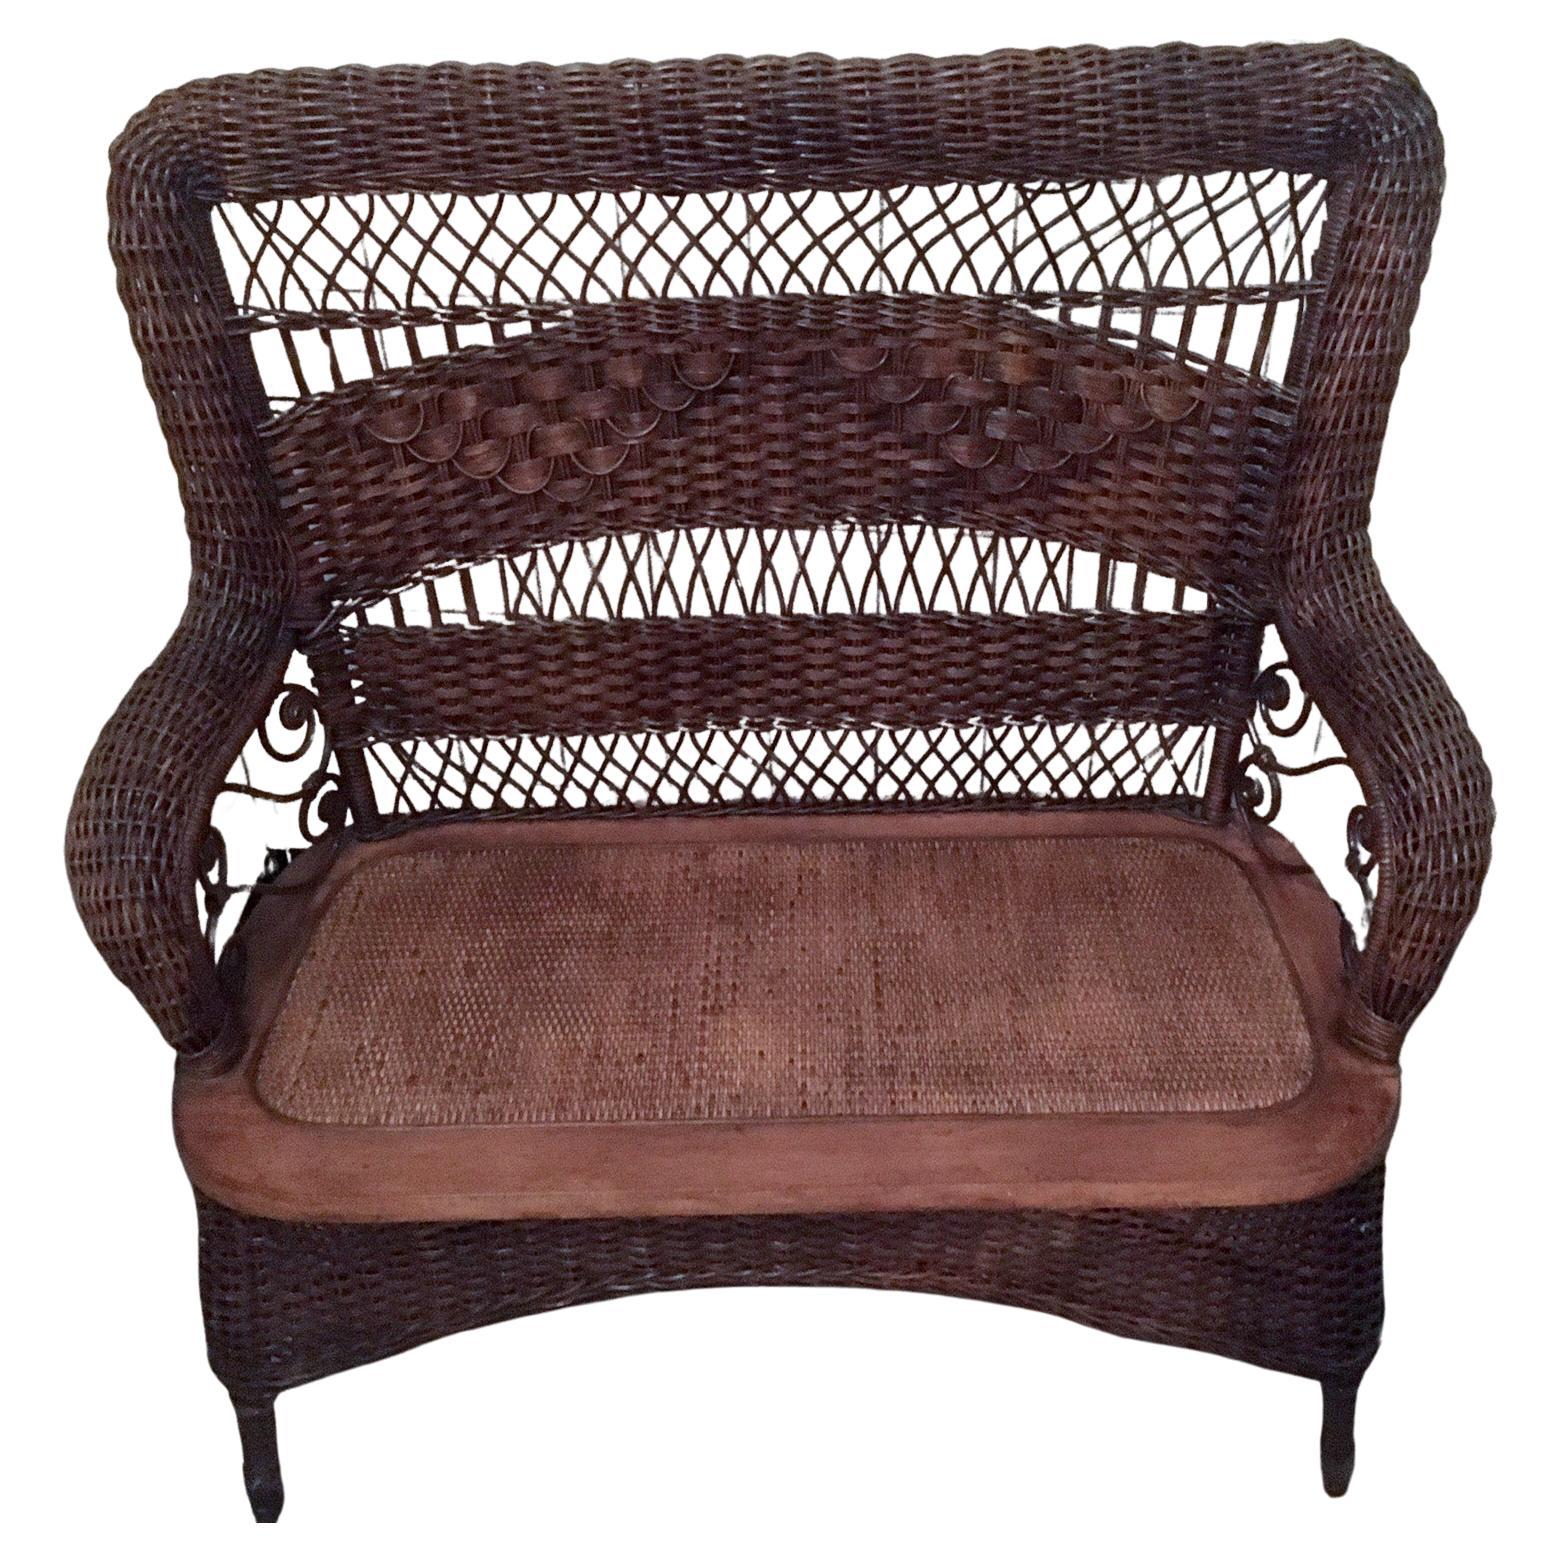 Early 1900s Natural Wicker Heywood Wakefield Settee For Sale